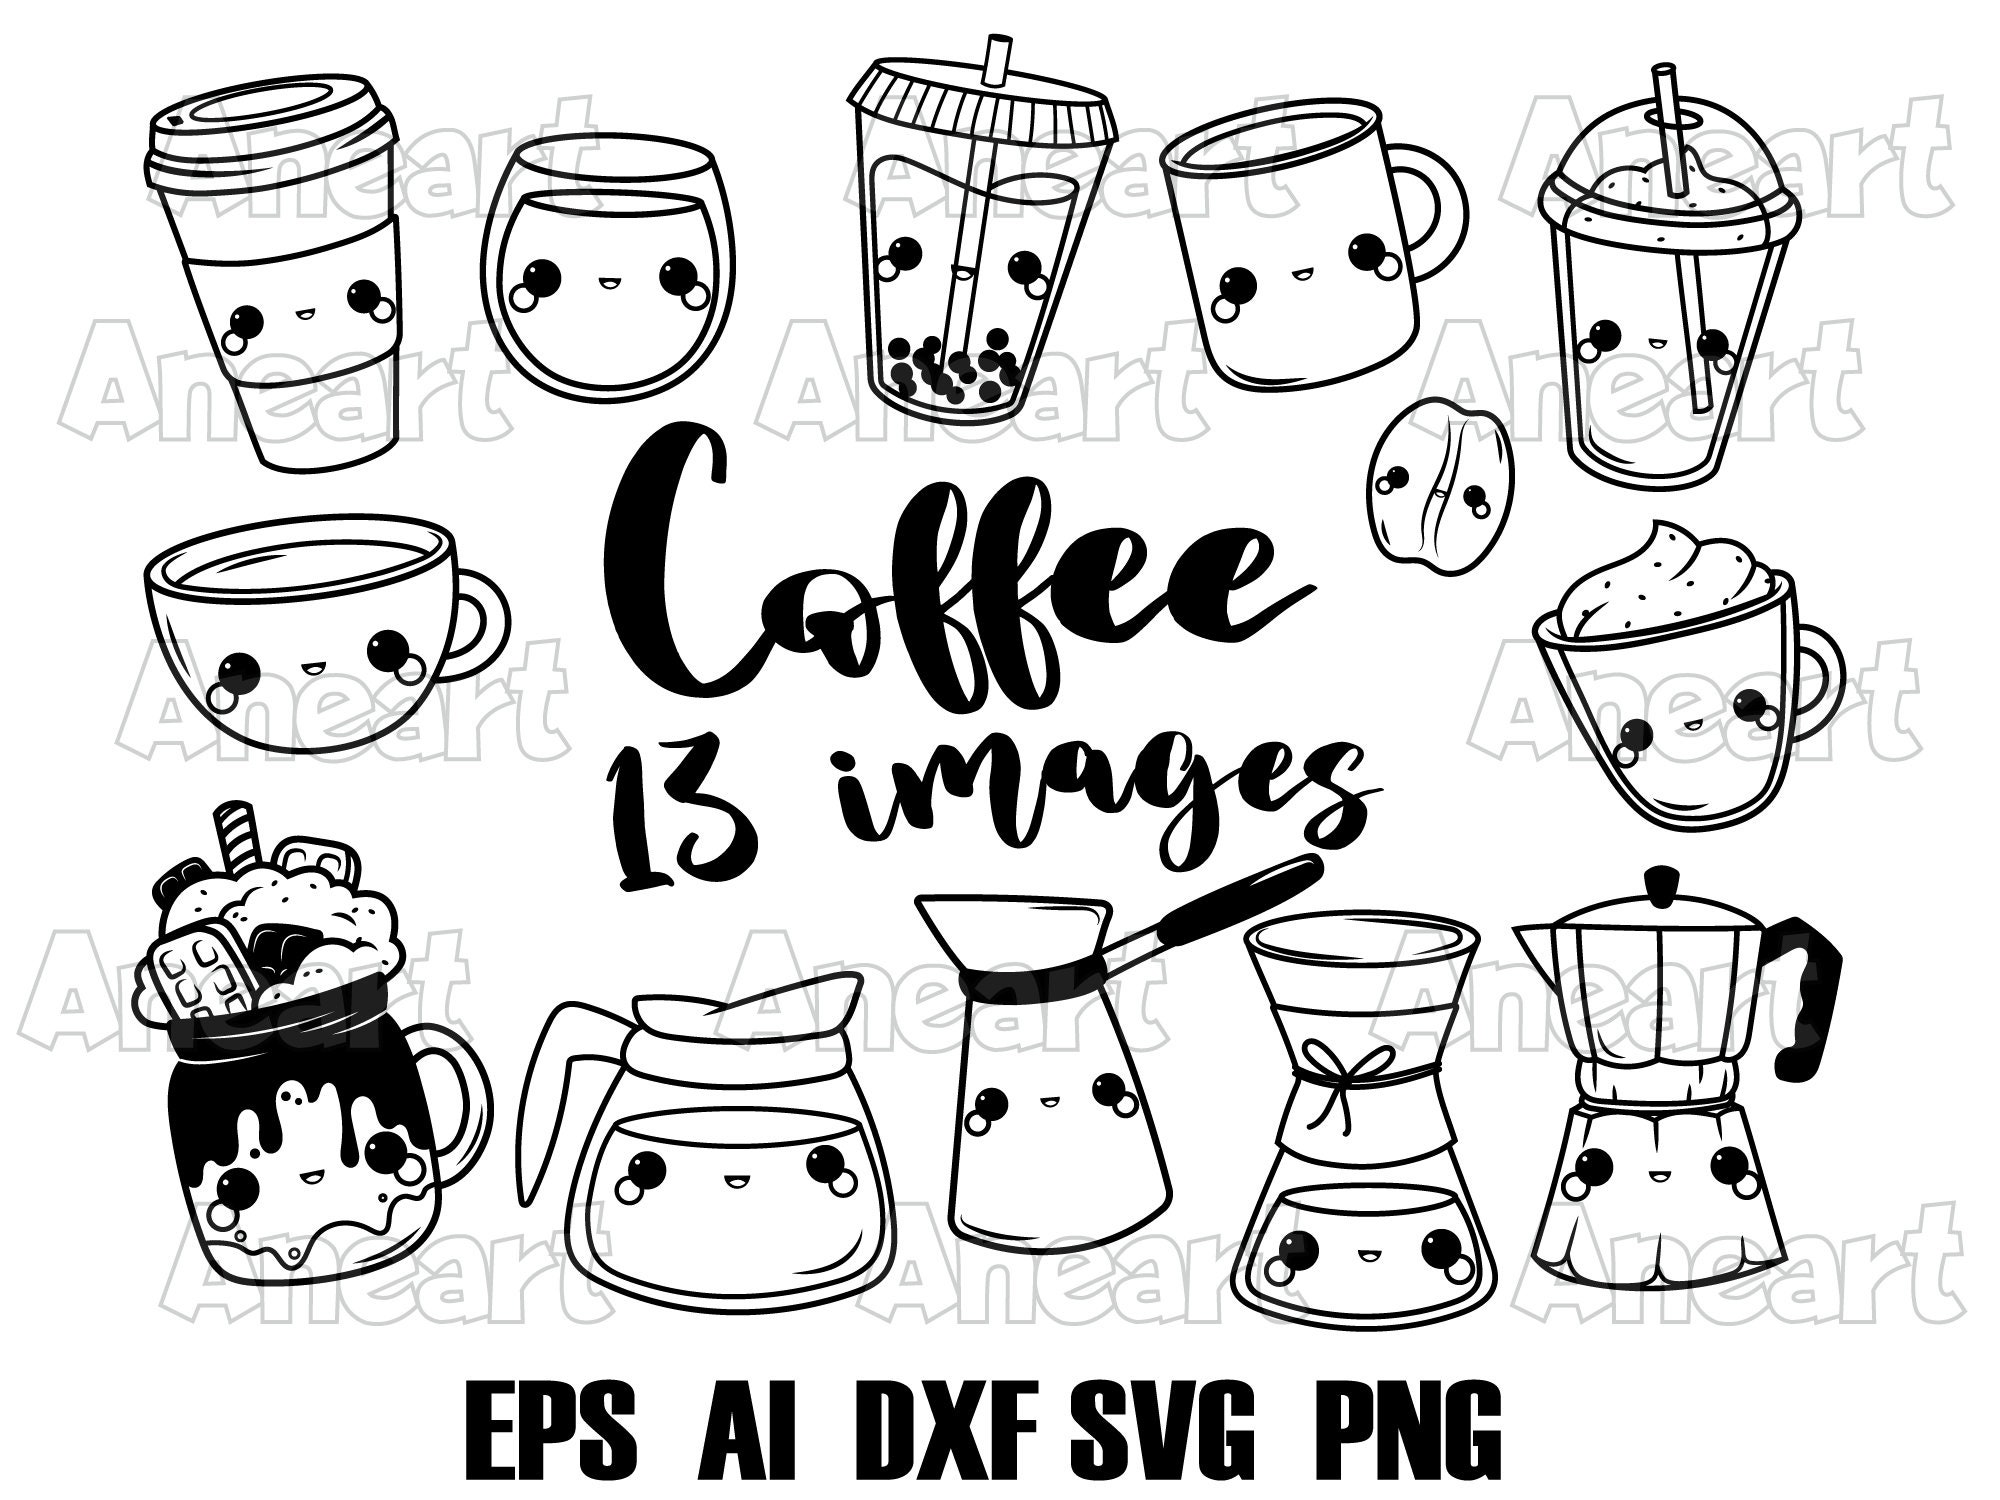 Cute Coffee Cup Expressions Clip Art Set – Daily Art Hub // Graphics,  Alphabets & SVG